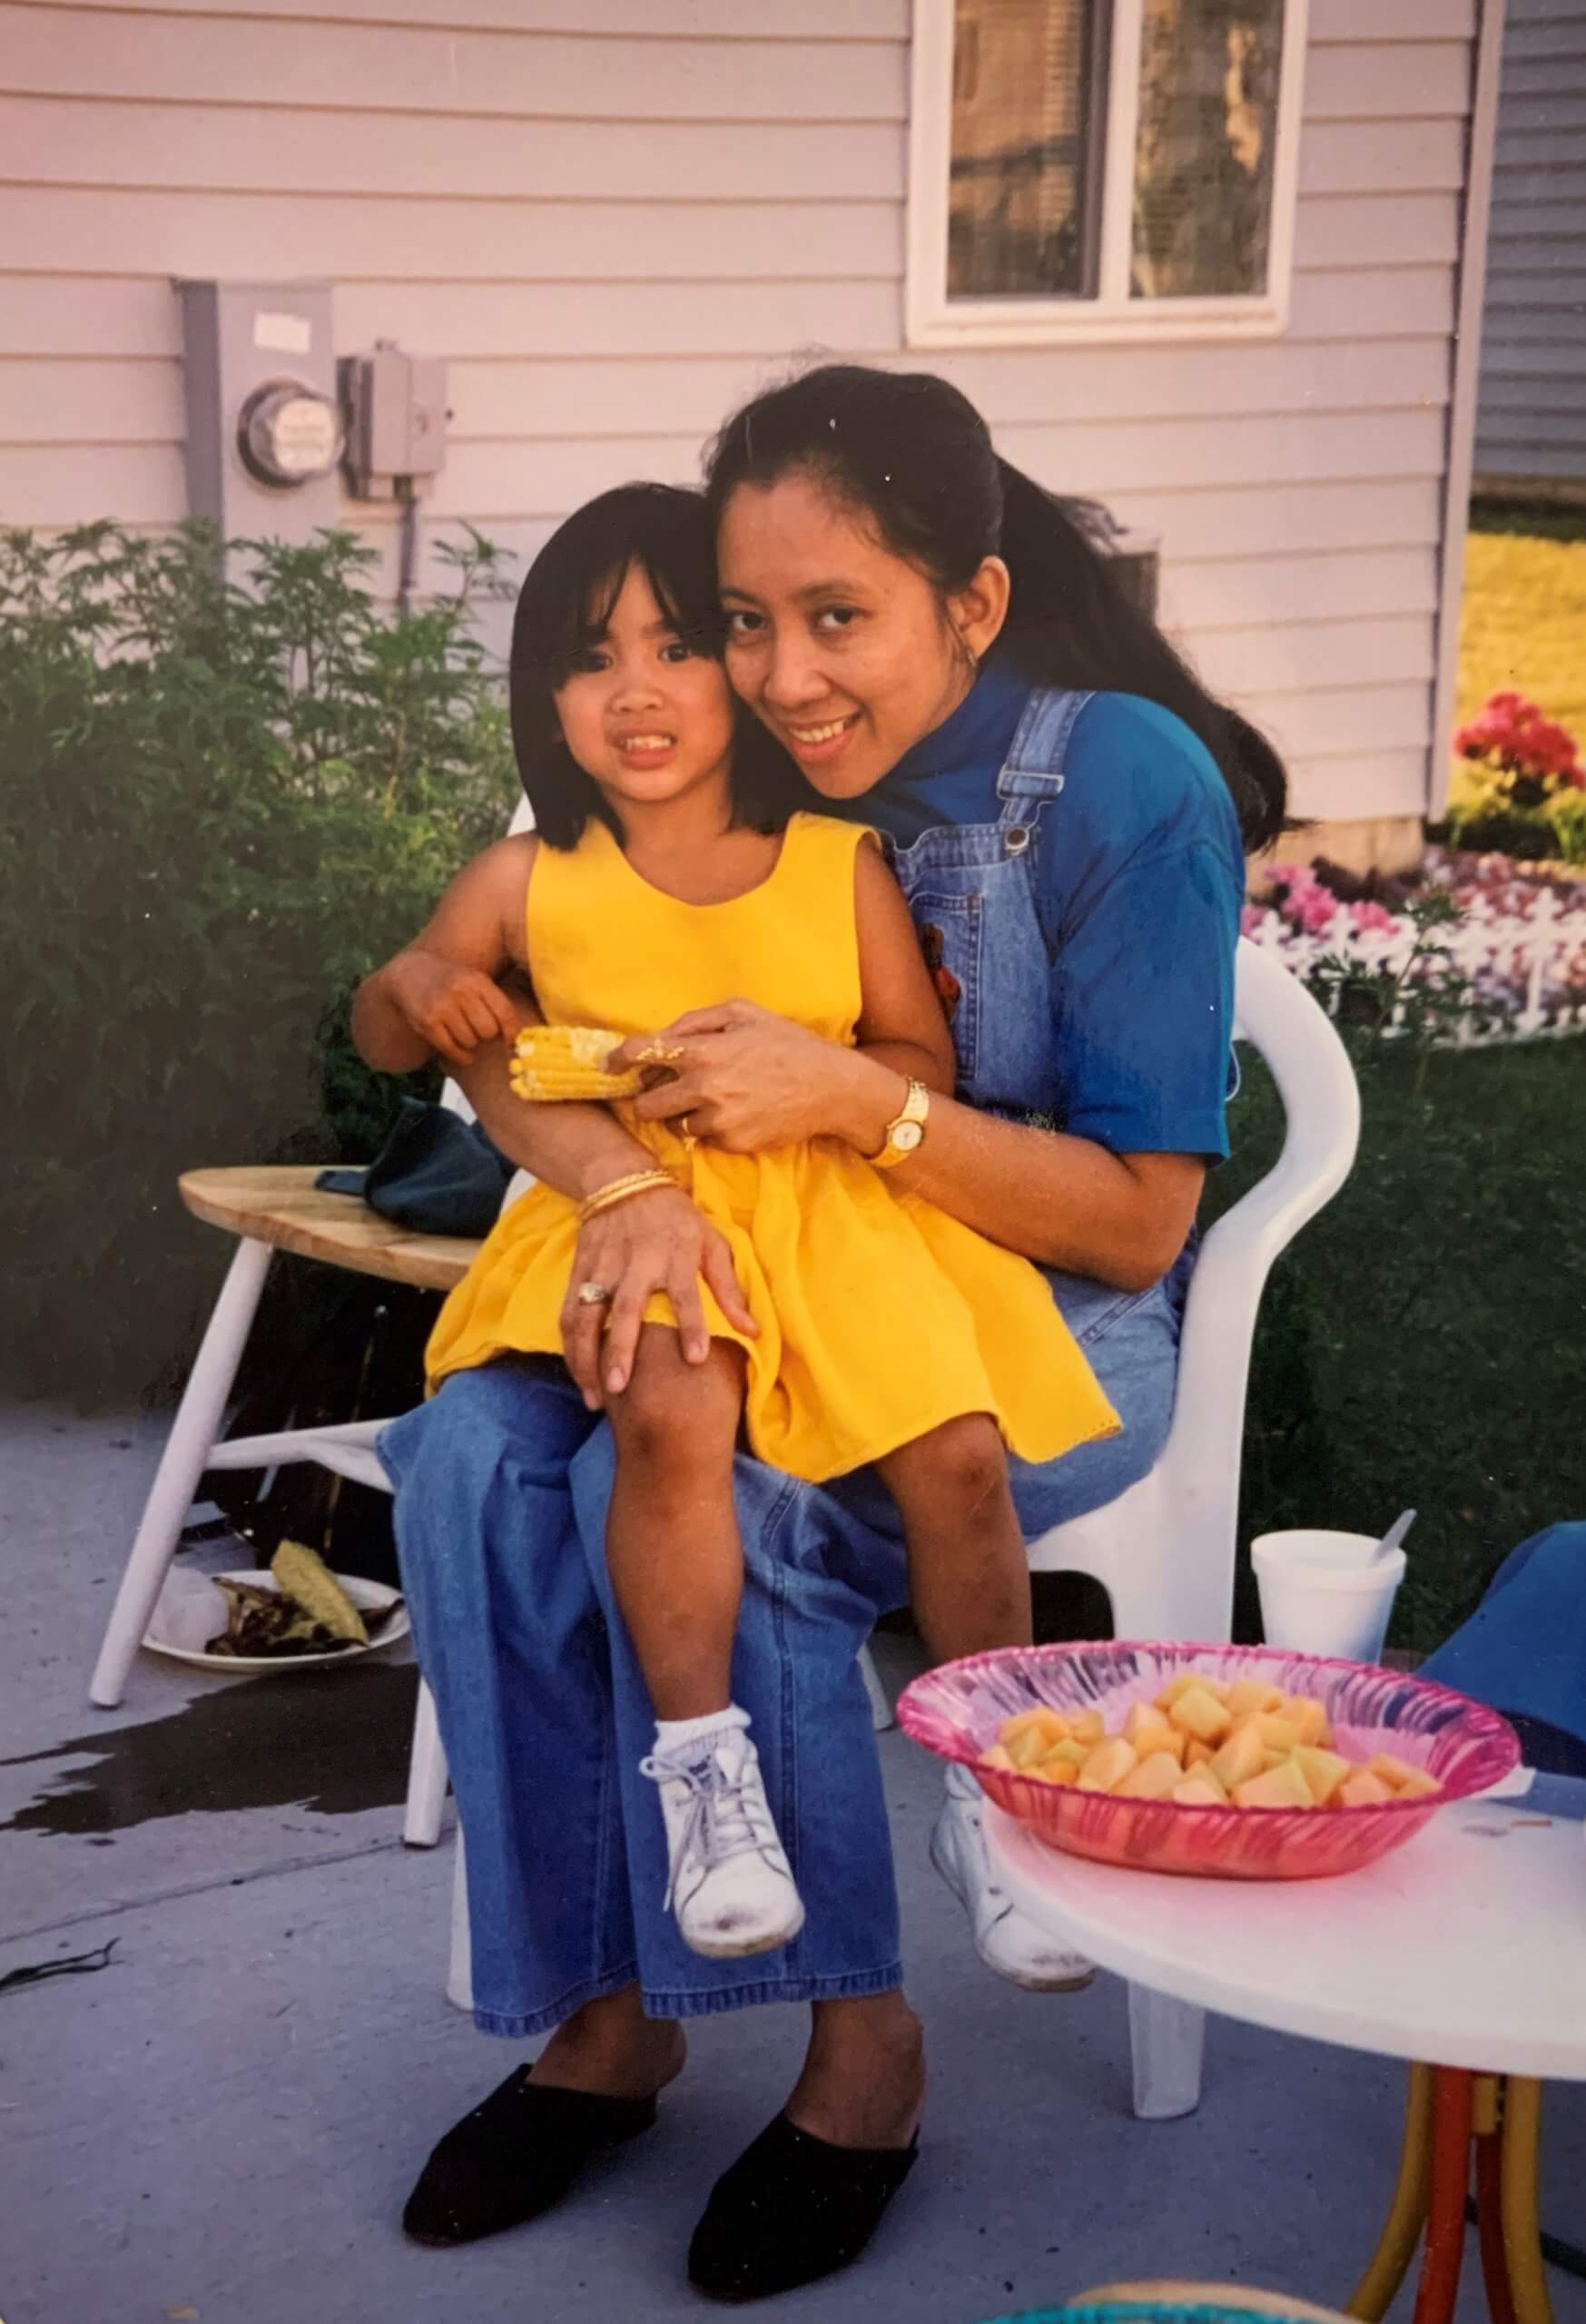 Photograph of a mother and young daughter sitting cuddling on a chair. The mother is on the right, the little girl on the left. The girl is wearing a yellow dress. They look happy.